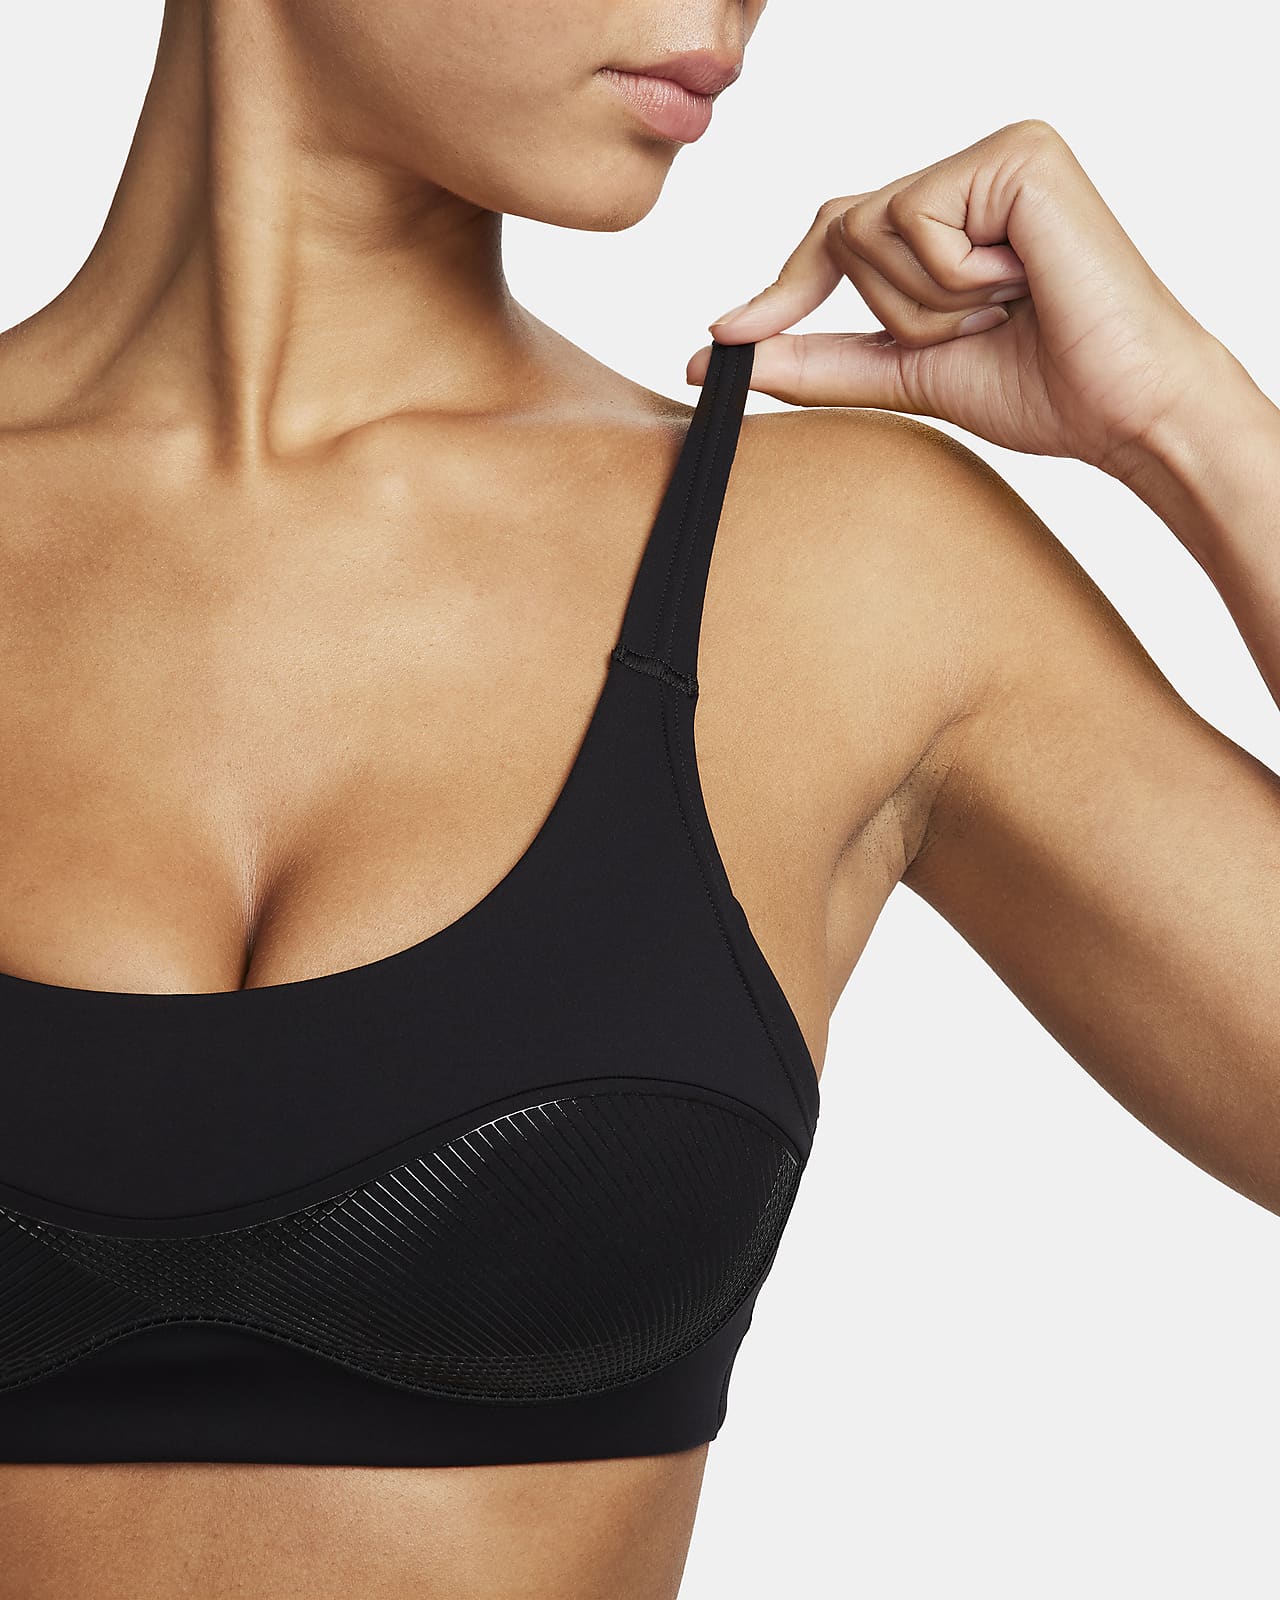 Nike Indy City Essential Women's Light-Support Lightly Lined Sports Bra.  Nike NL